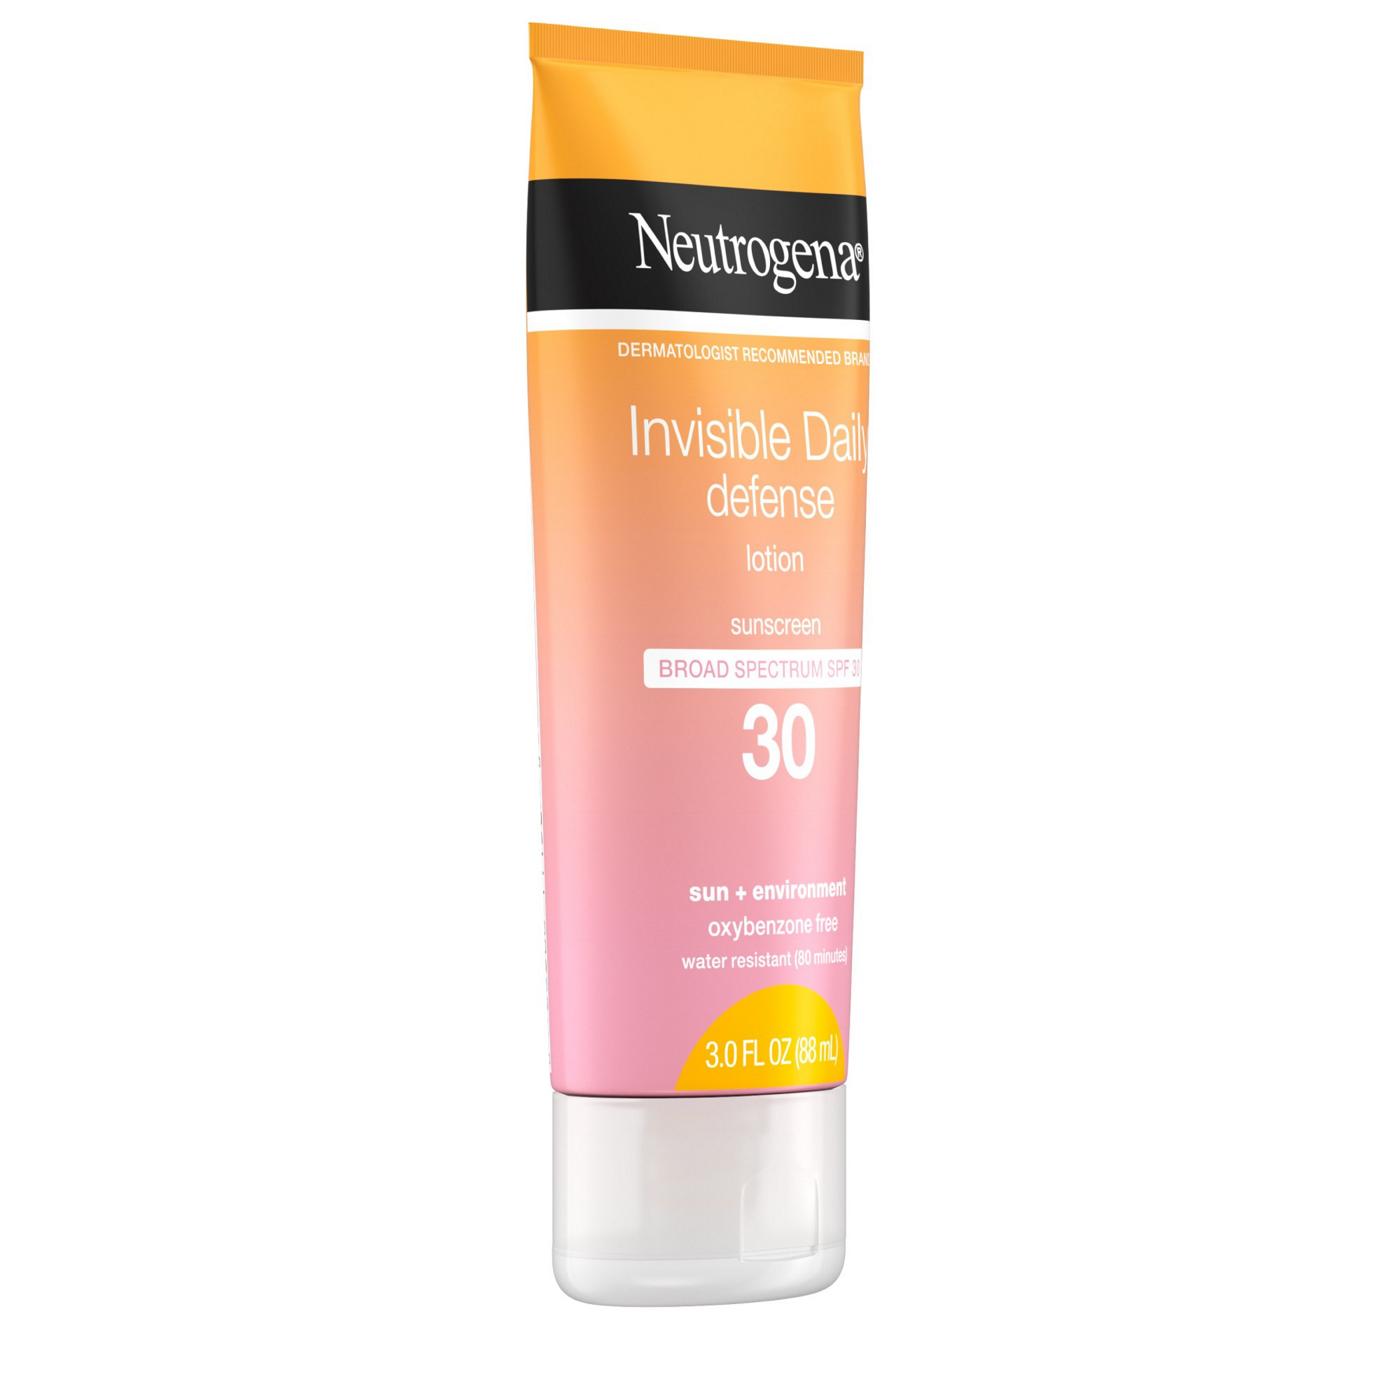 Neutrogena Invisible Daily Defense Sunscreen Lotion - SPF 30; image 3 of 5